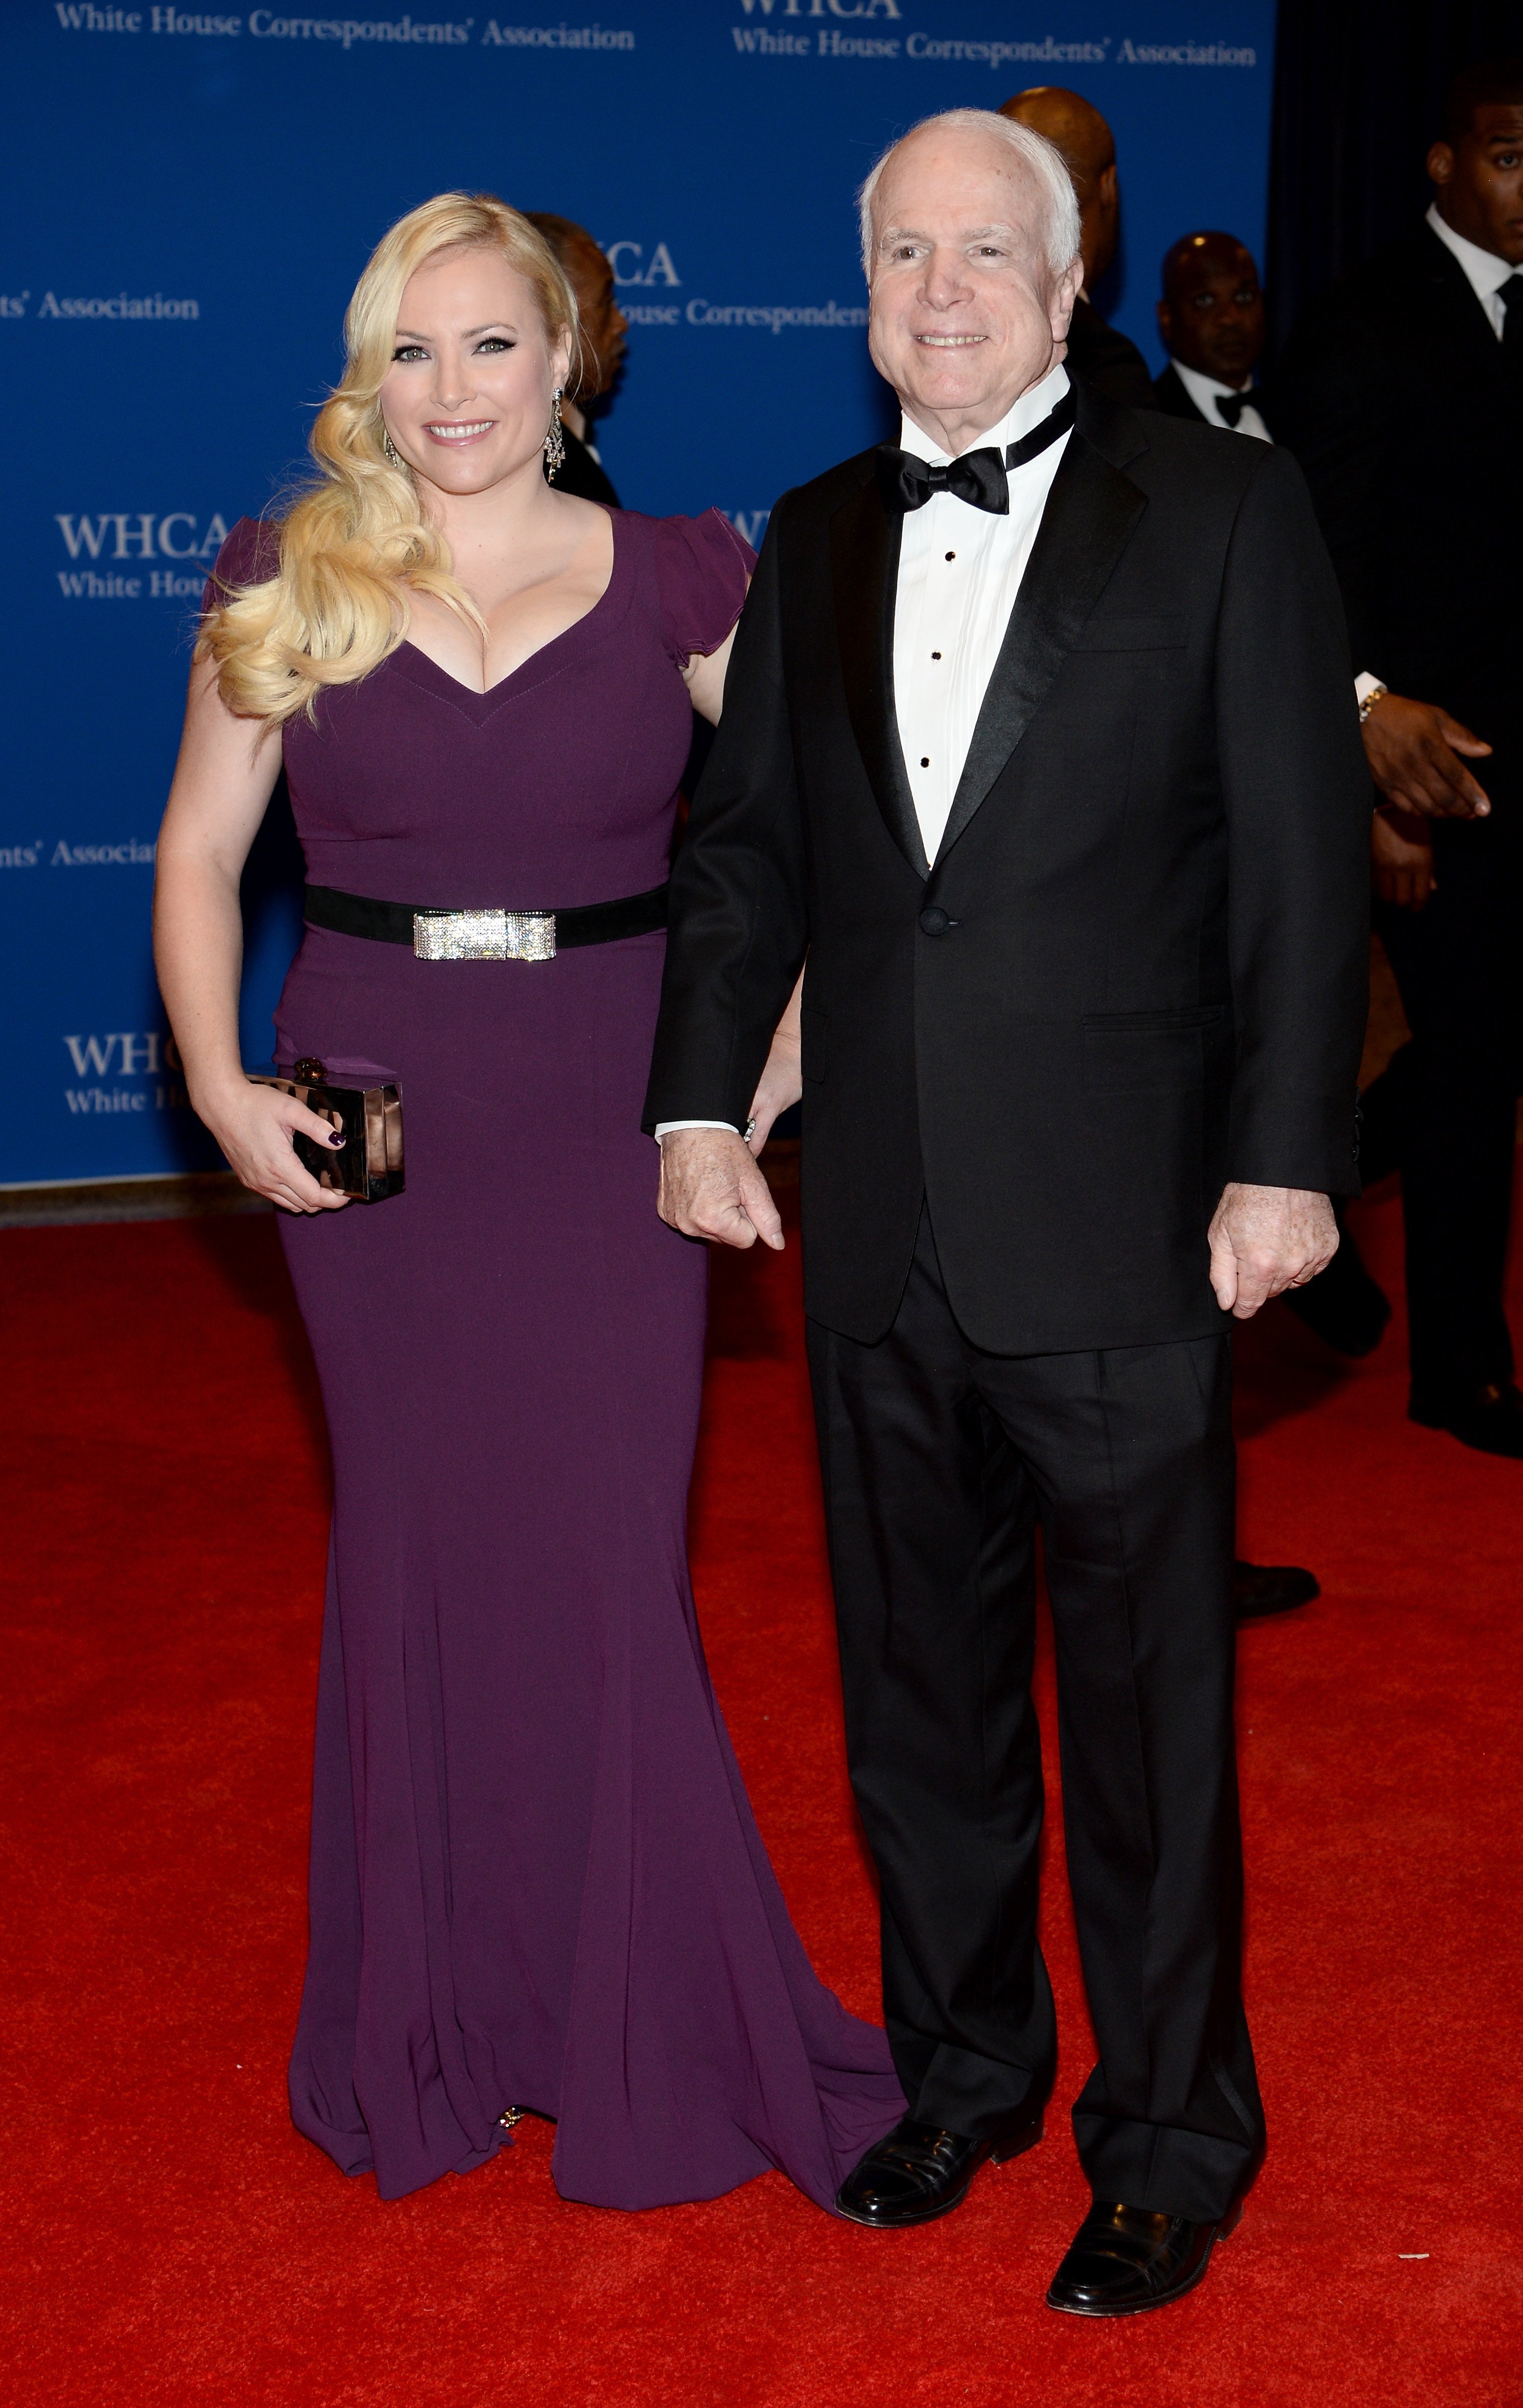 Meghan McCain and the late Senator John McCain attend the 100th Annual White House Correspondents' Dinner in Washington on May 3, 2014 | Photo: Getty Images